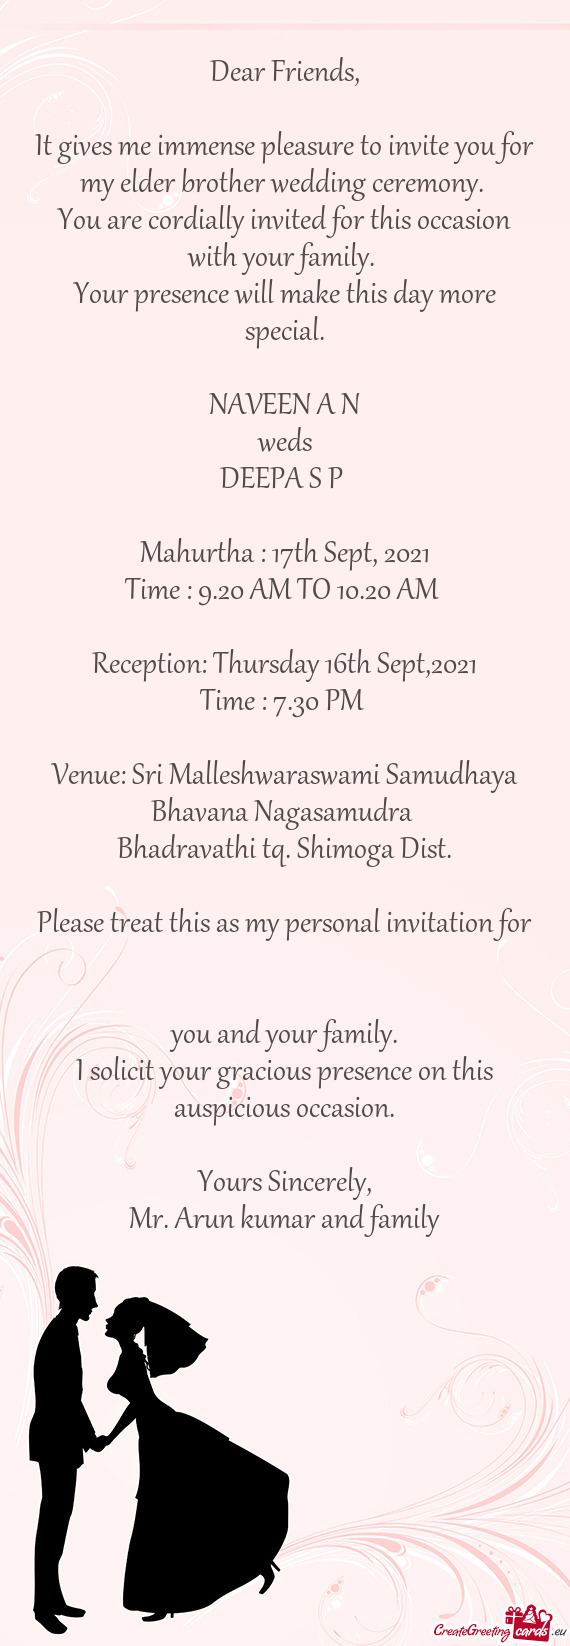 It gives me immense pleasure to invite you for my elder brother wedding ceremony